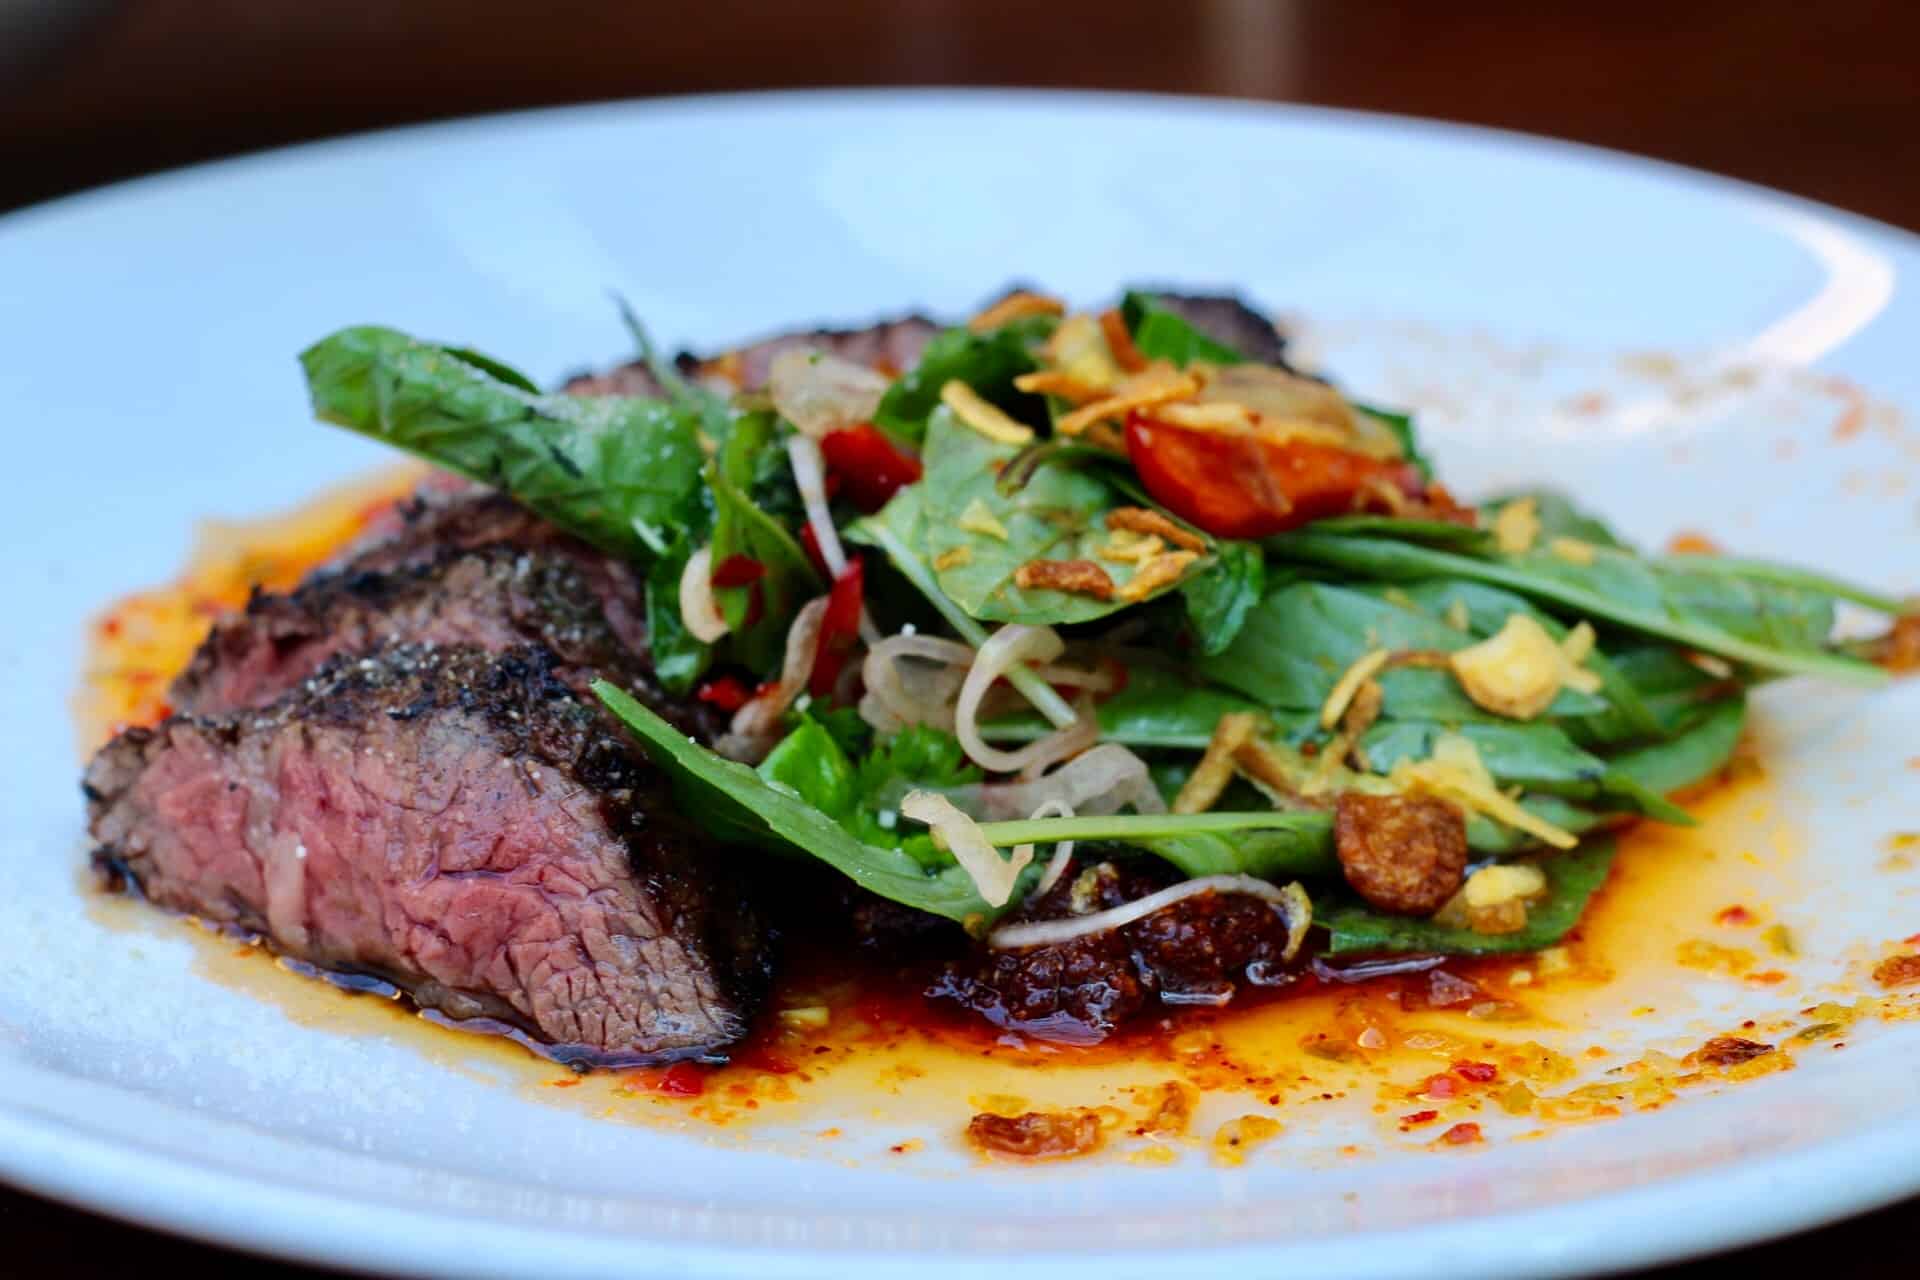 Tiger Cry with char-grilled hanger steak at Sway